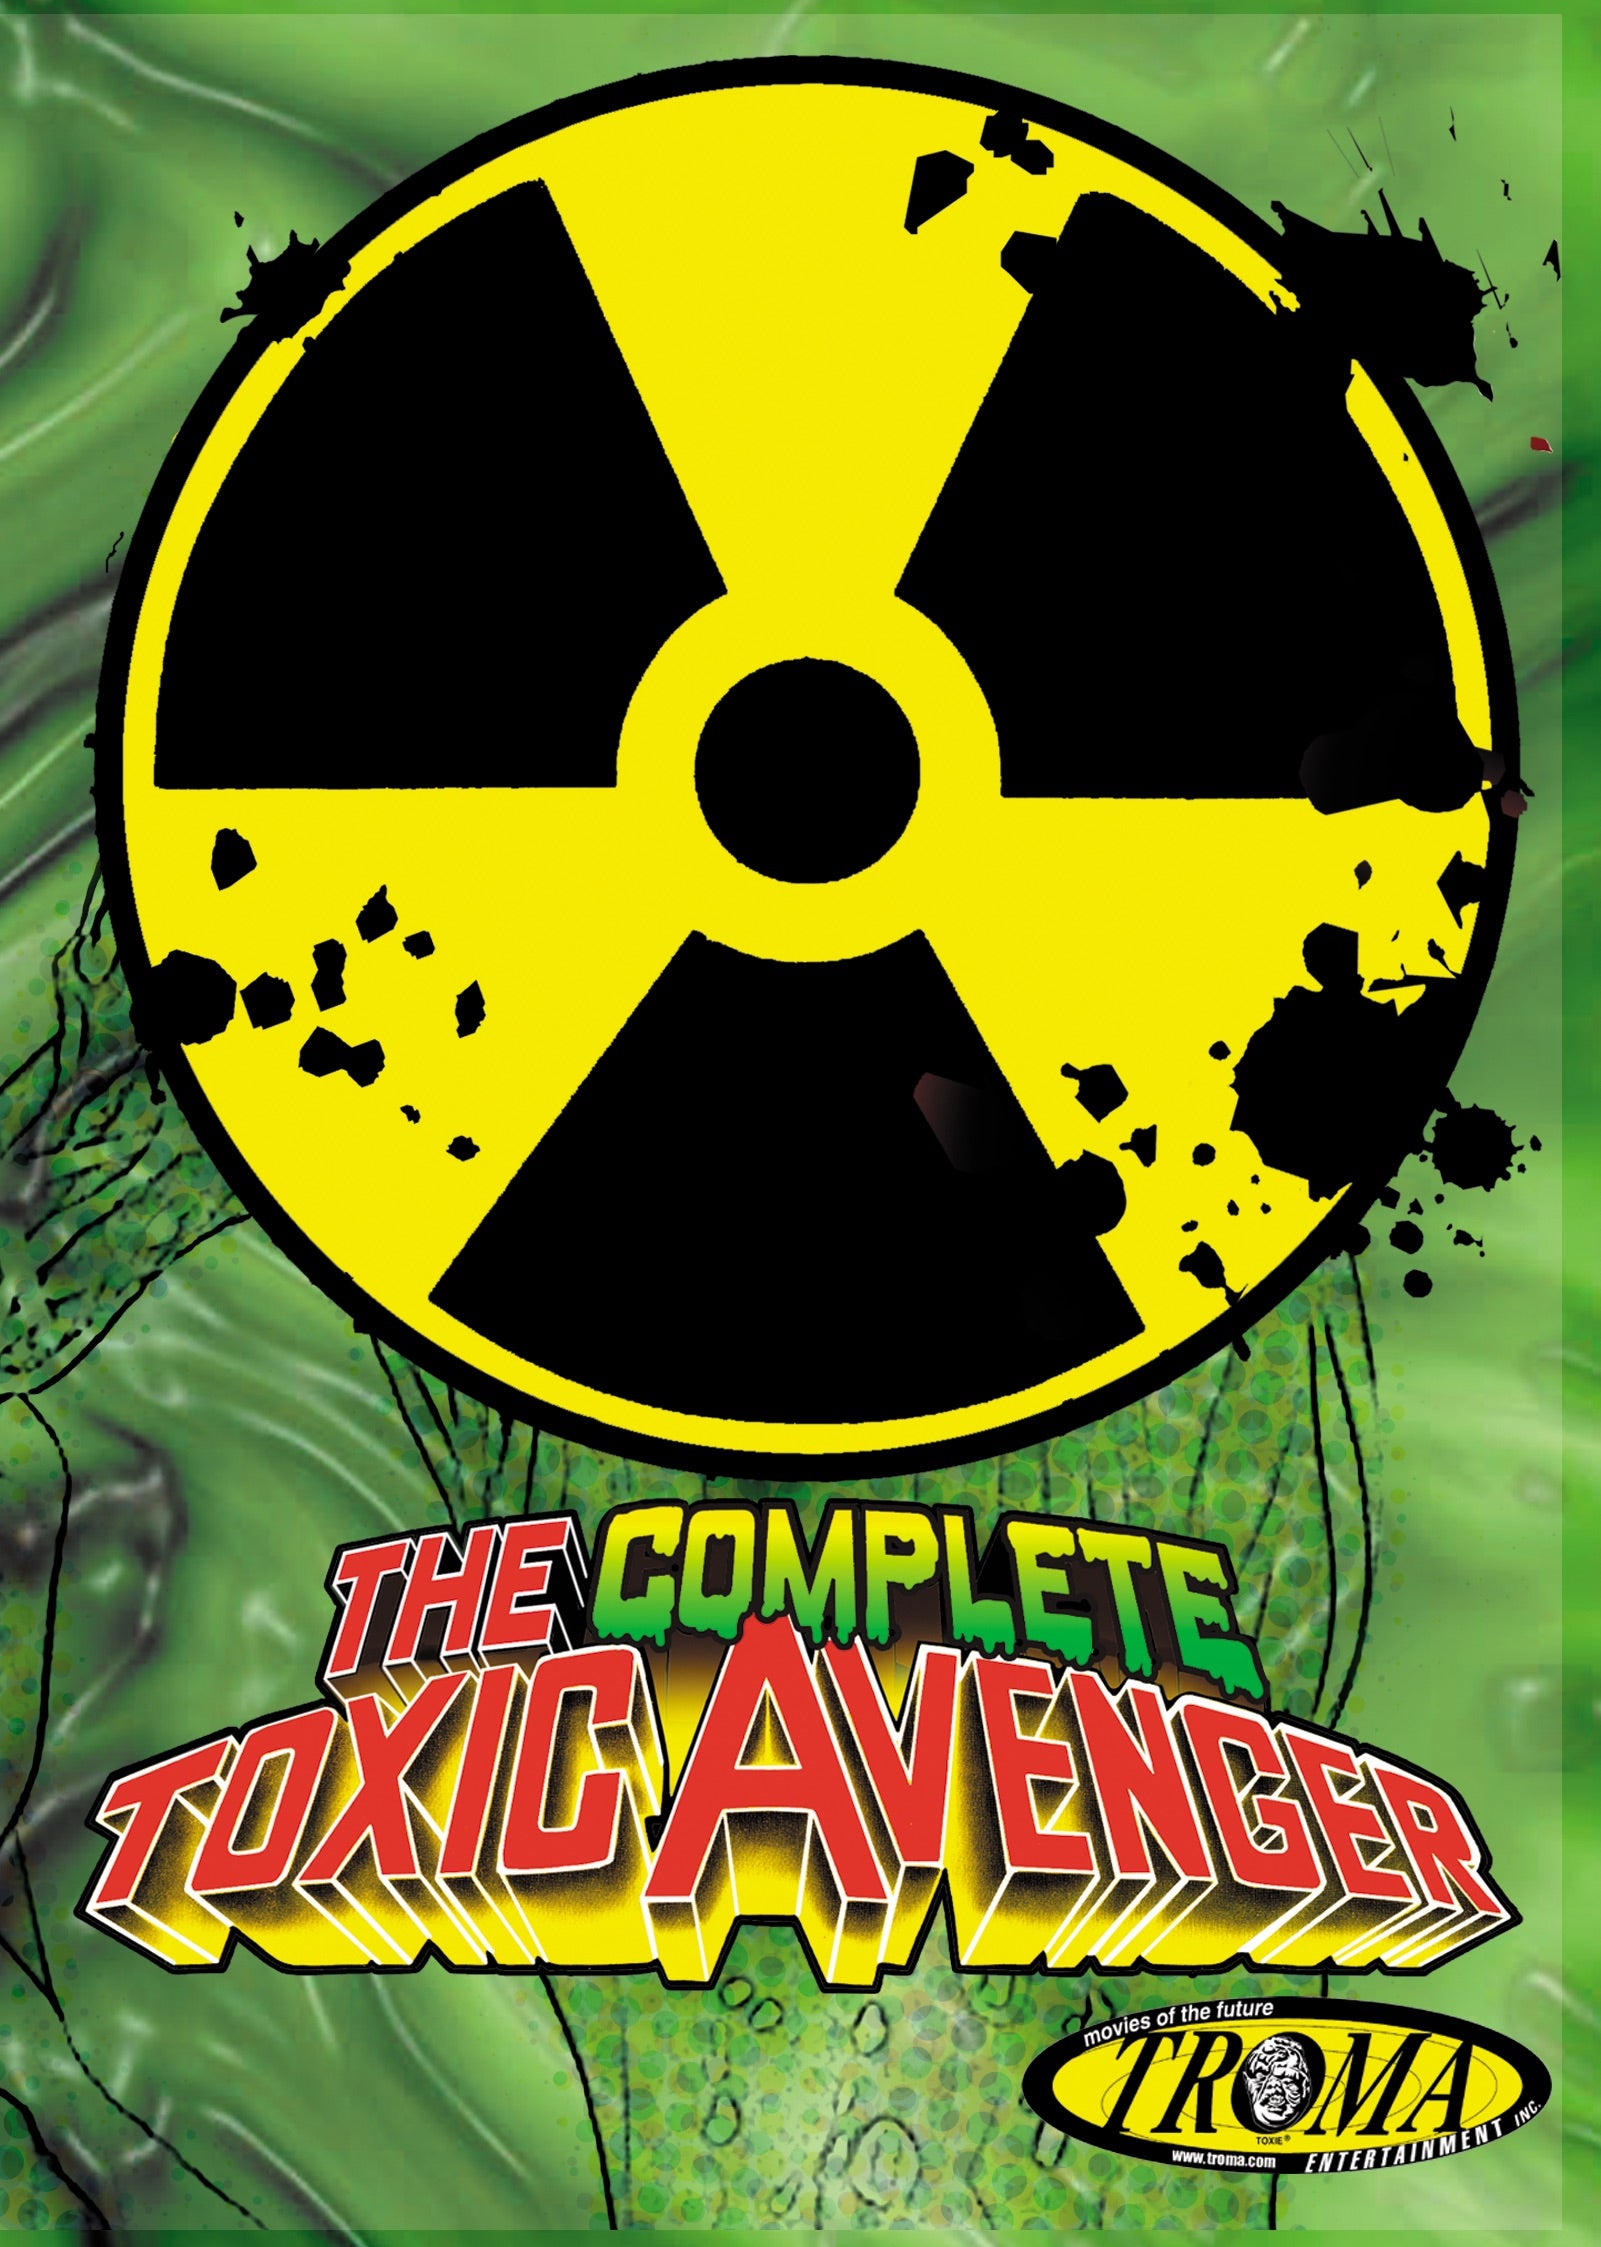 THE COMPLETE TOXIC AVENGER DVD